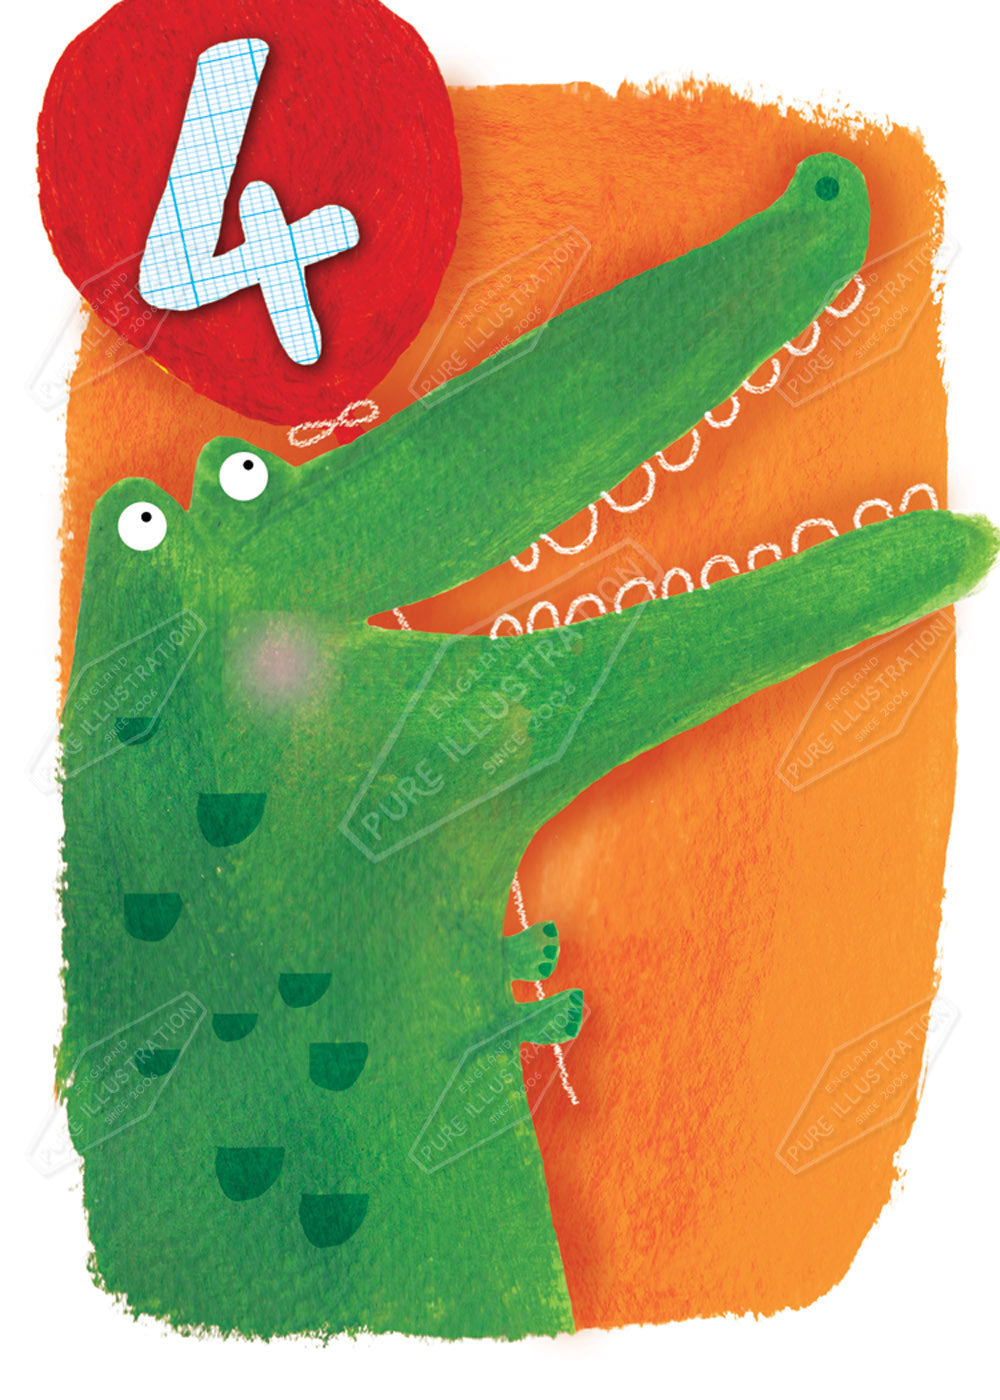 Crocodile Age Card Greeting Card Design by Cory Reid for Pure Art Licensing Agency International